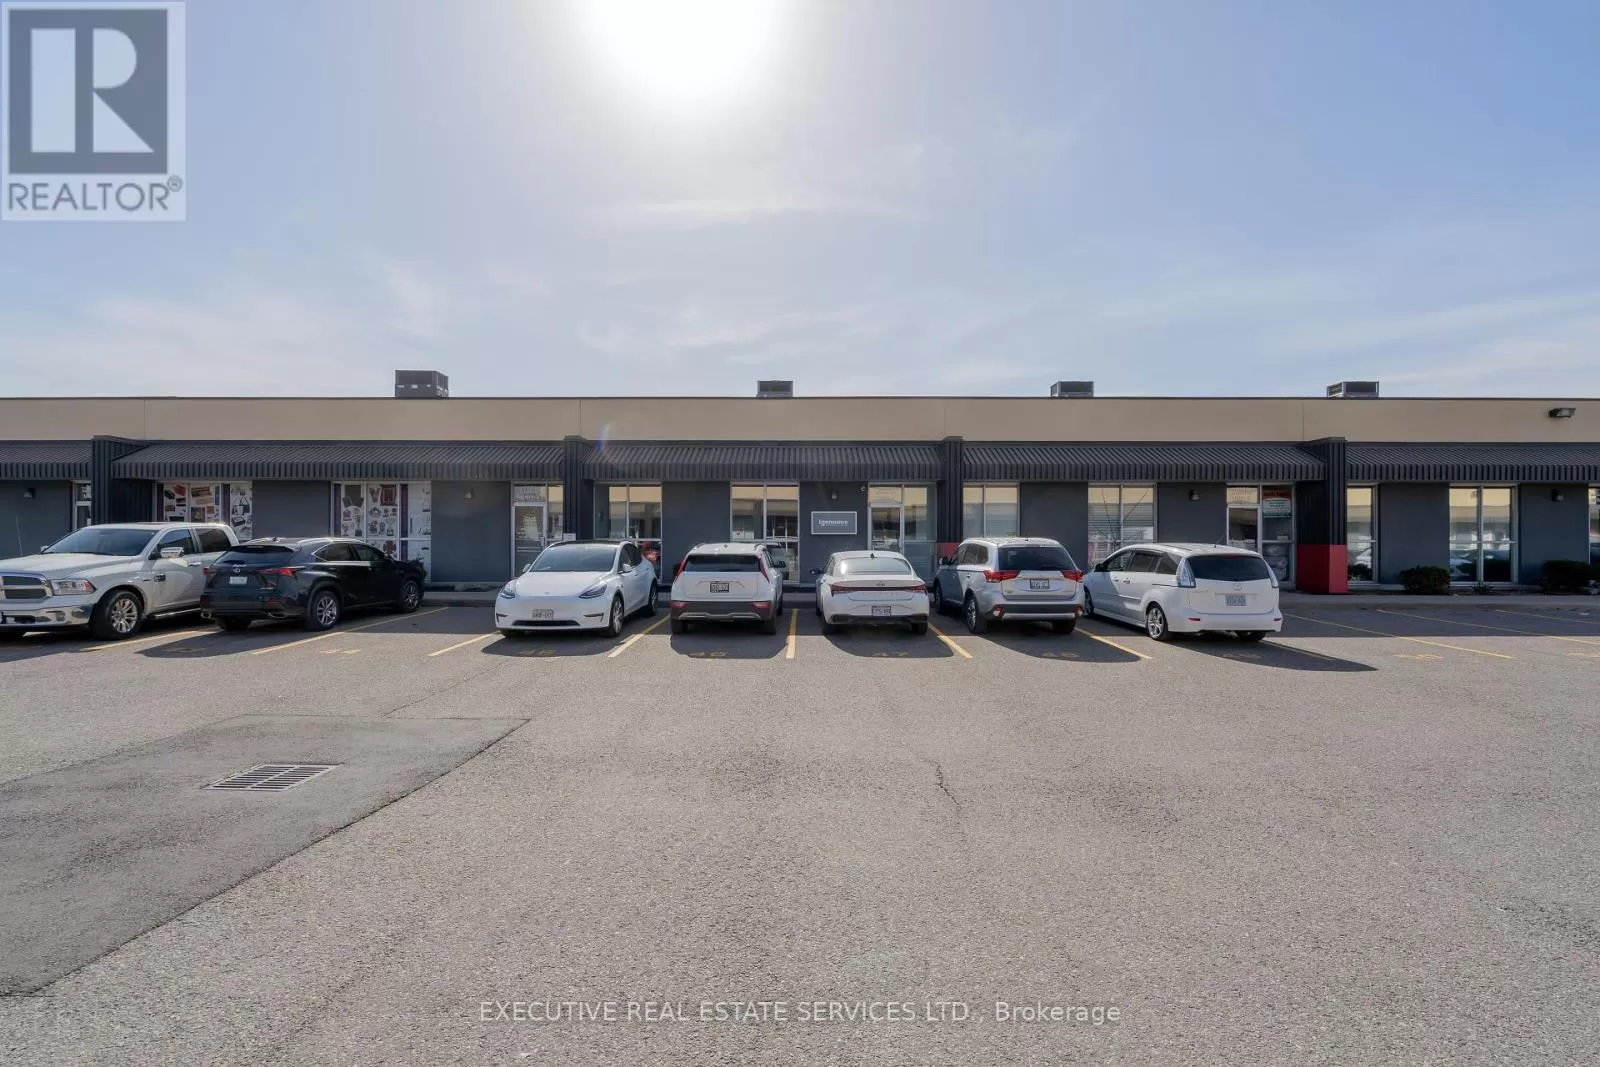 Offices for rent: 4 - 2780 Slough Street, Mississauga, Ontario L4T 1G3